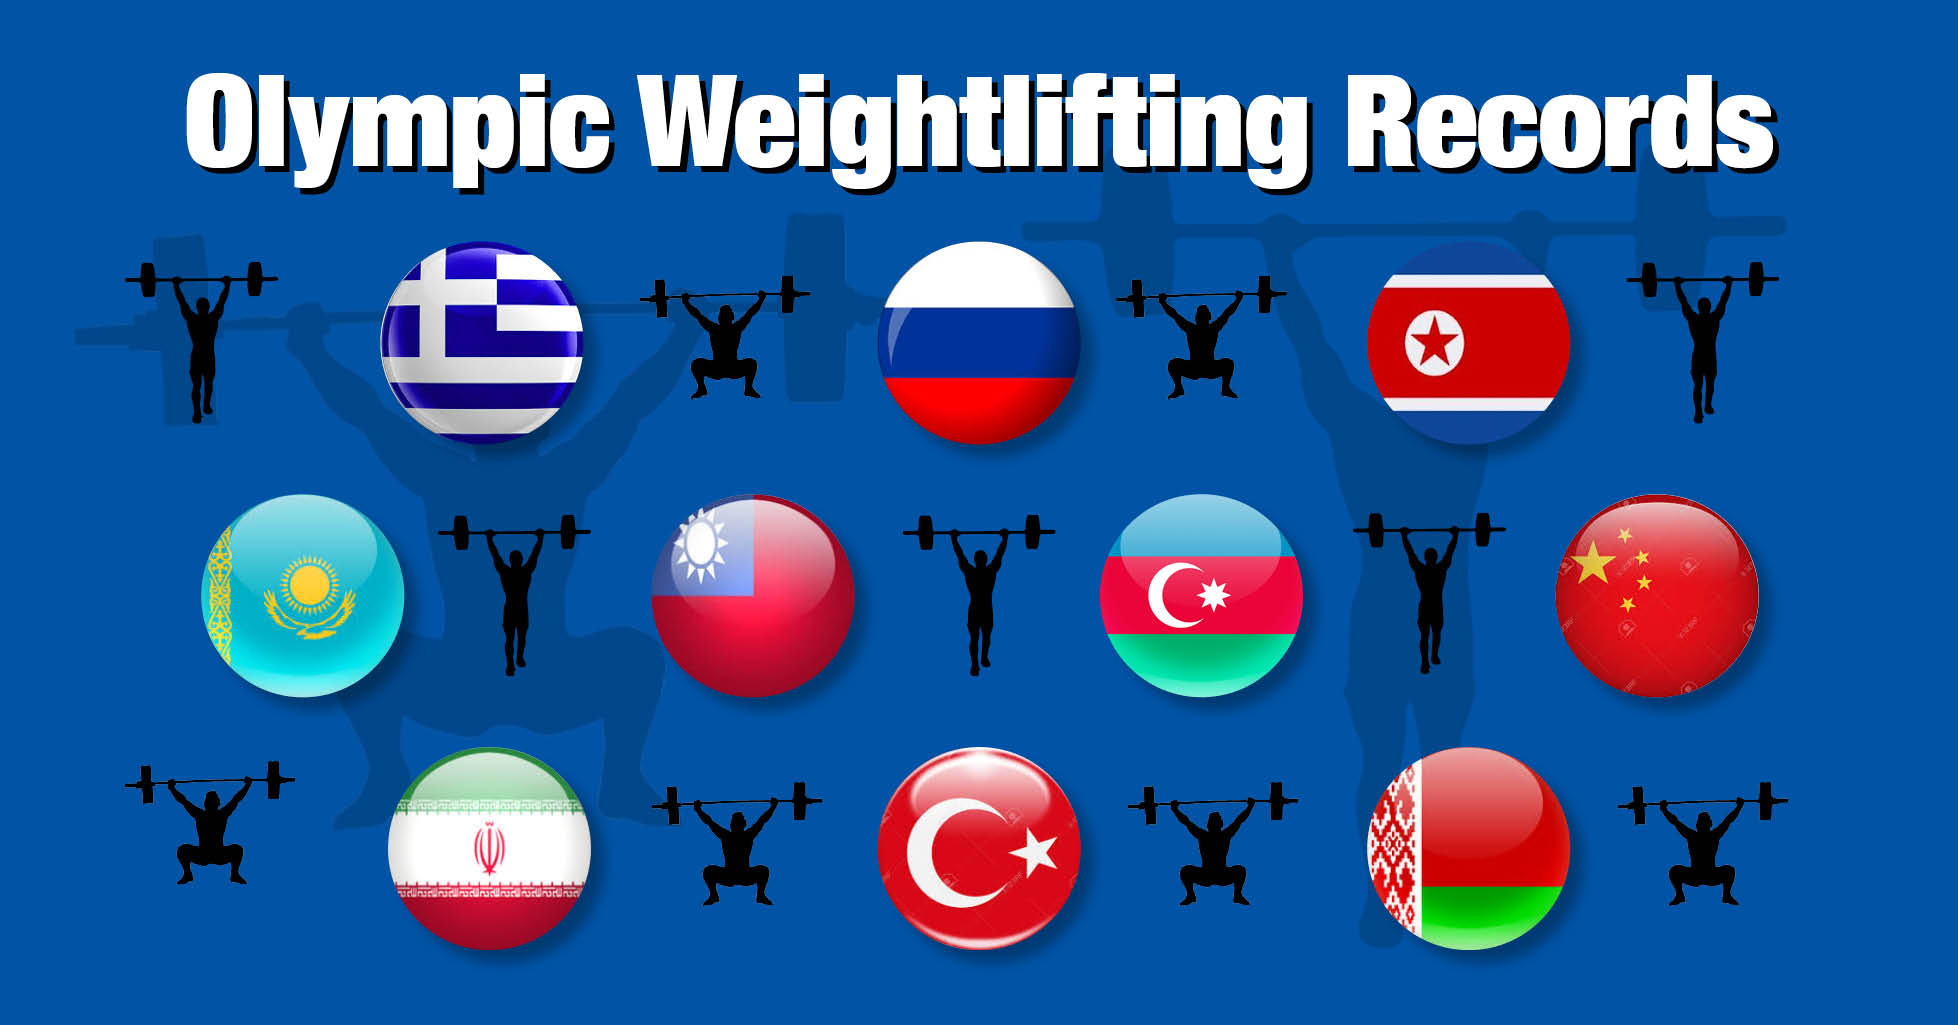 Weightlifting Record Chart